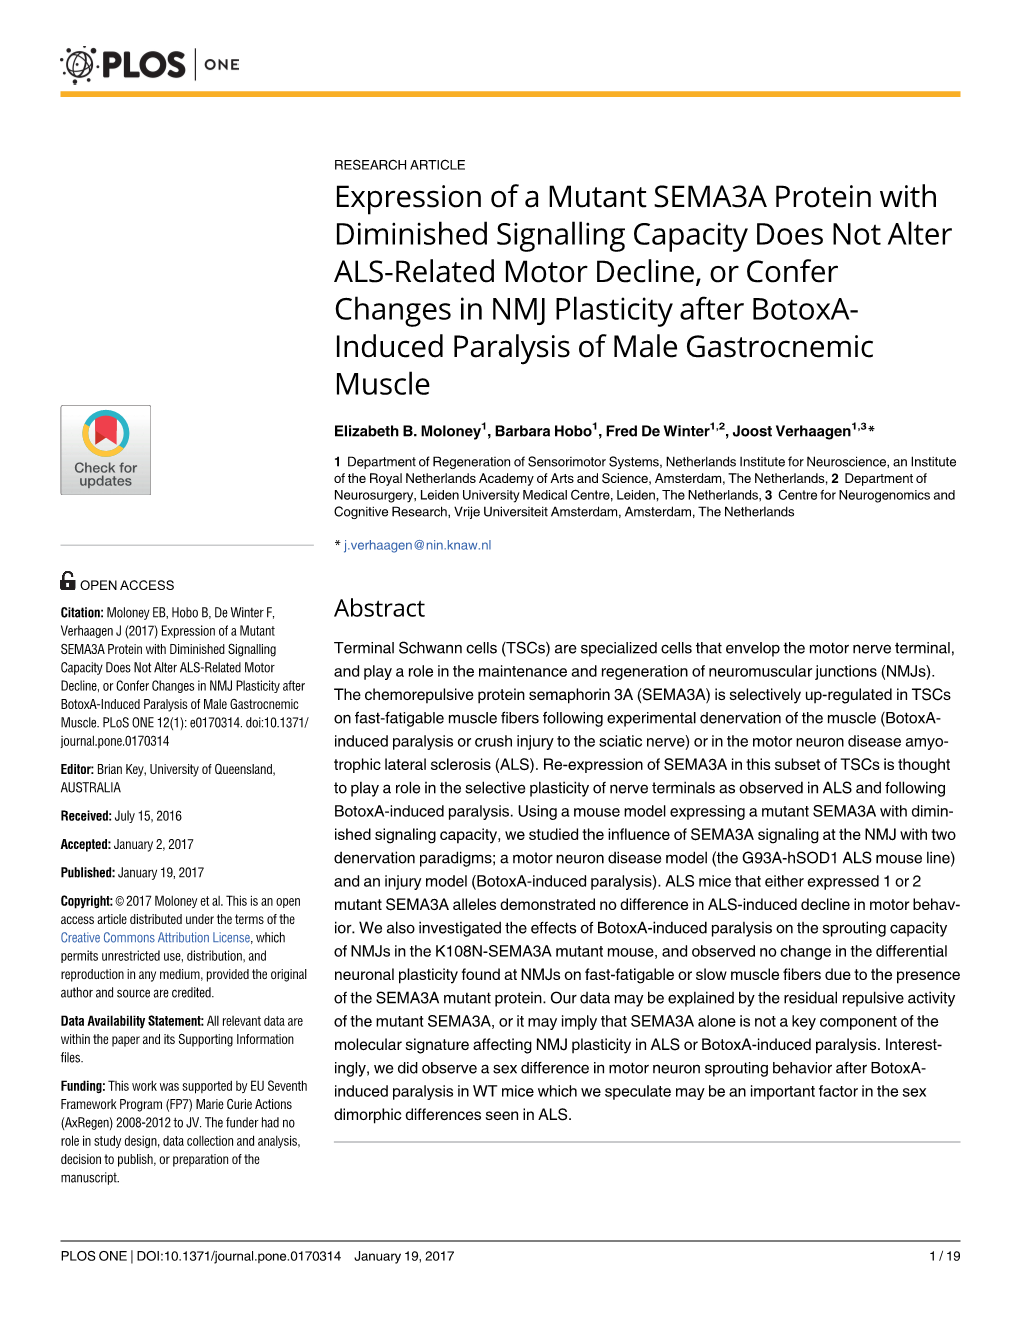 Expression of a Mutant SEMA3A Protein With